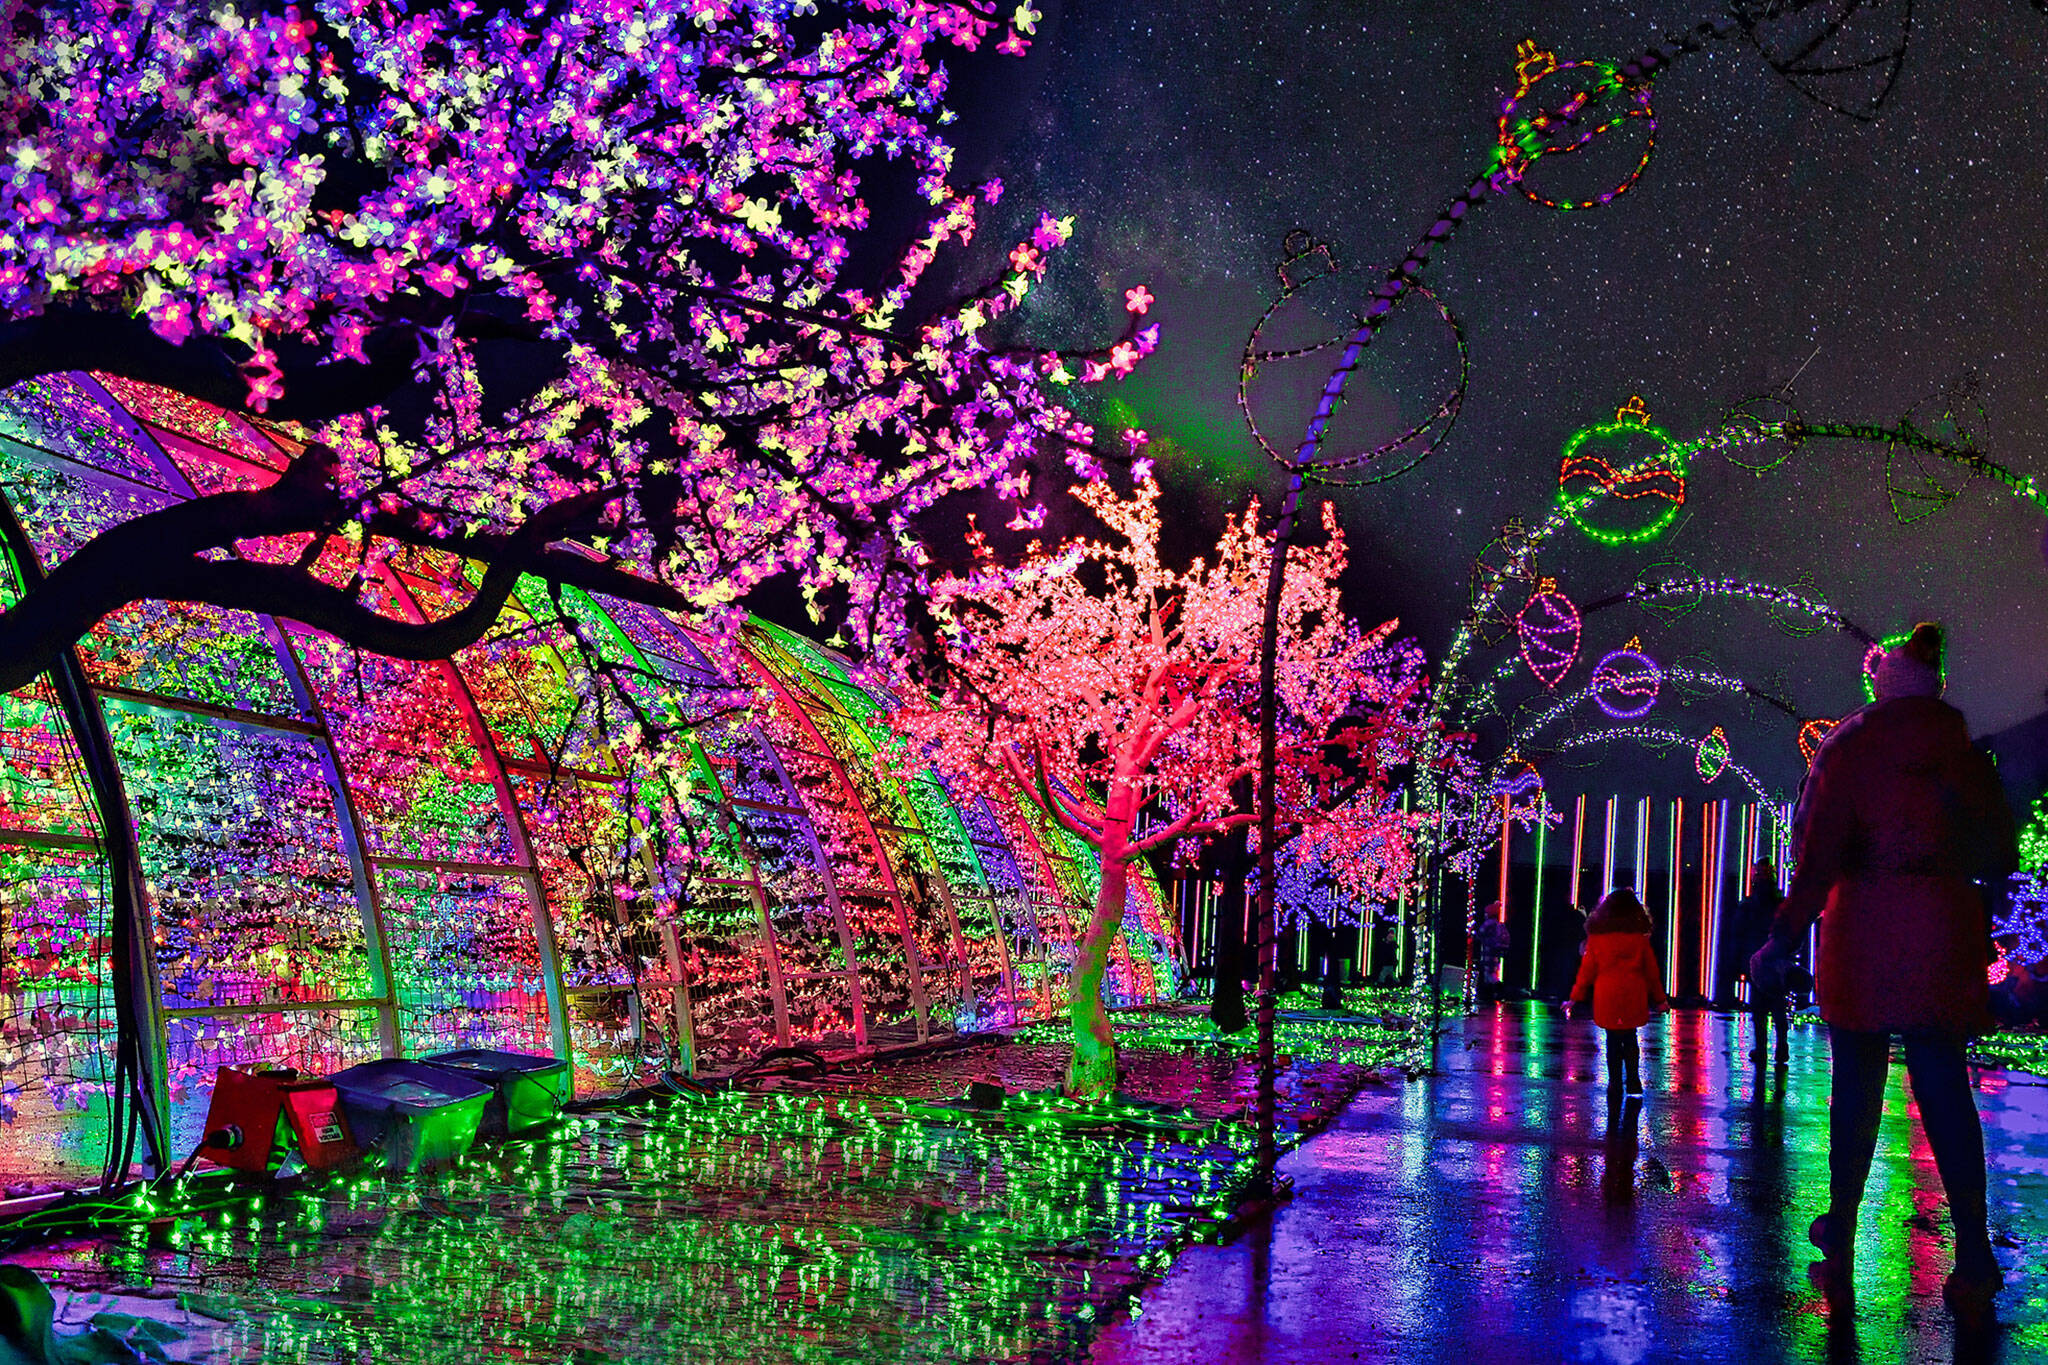 Dazzling lights festival with Christmas market opening near Toronto